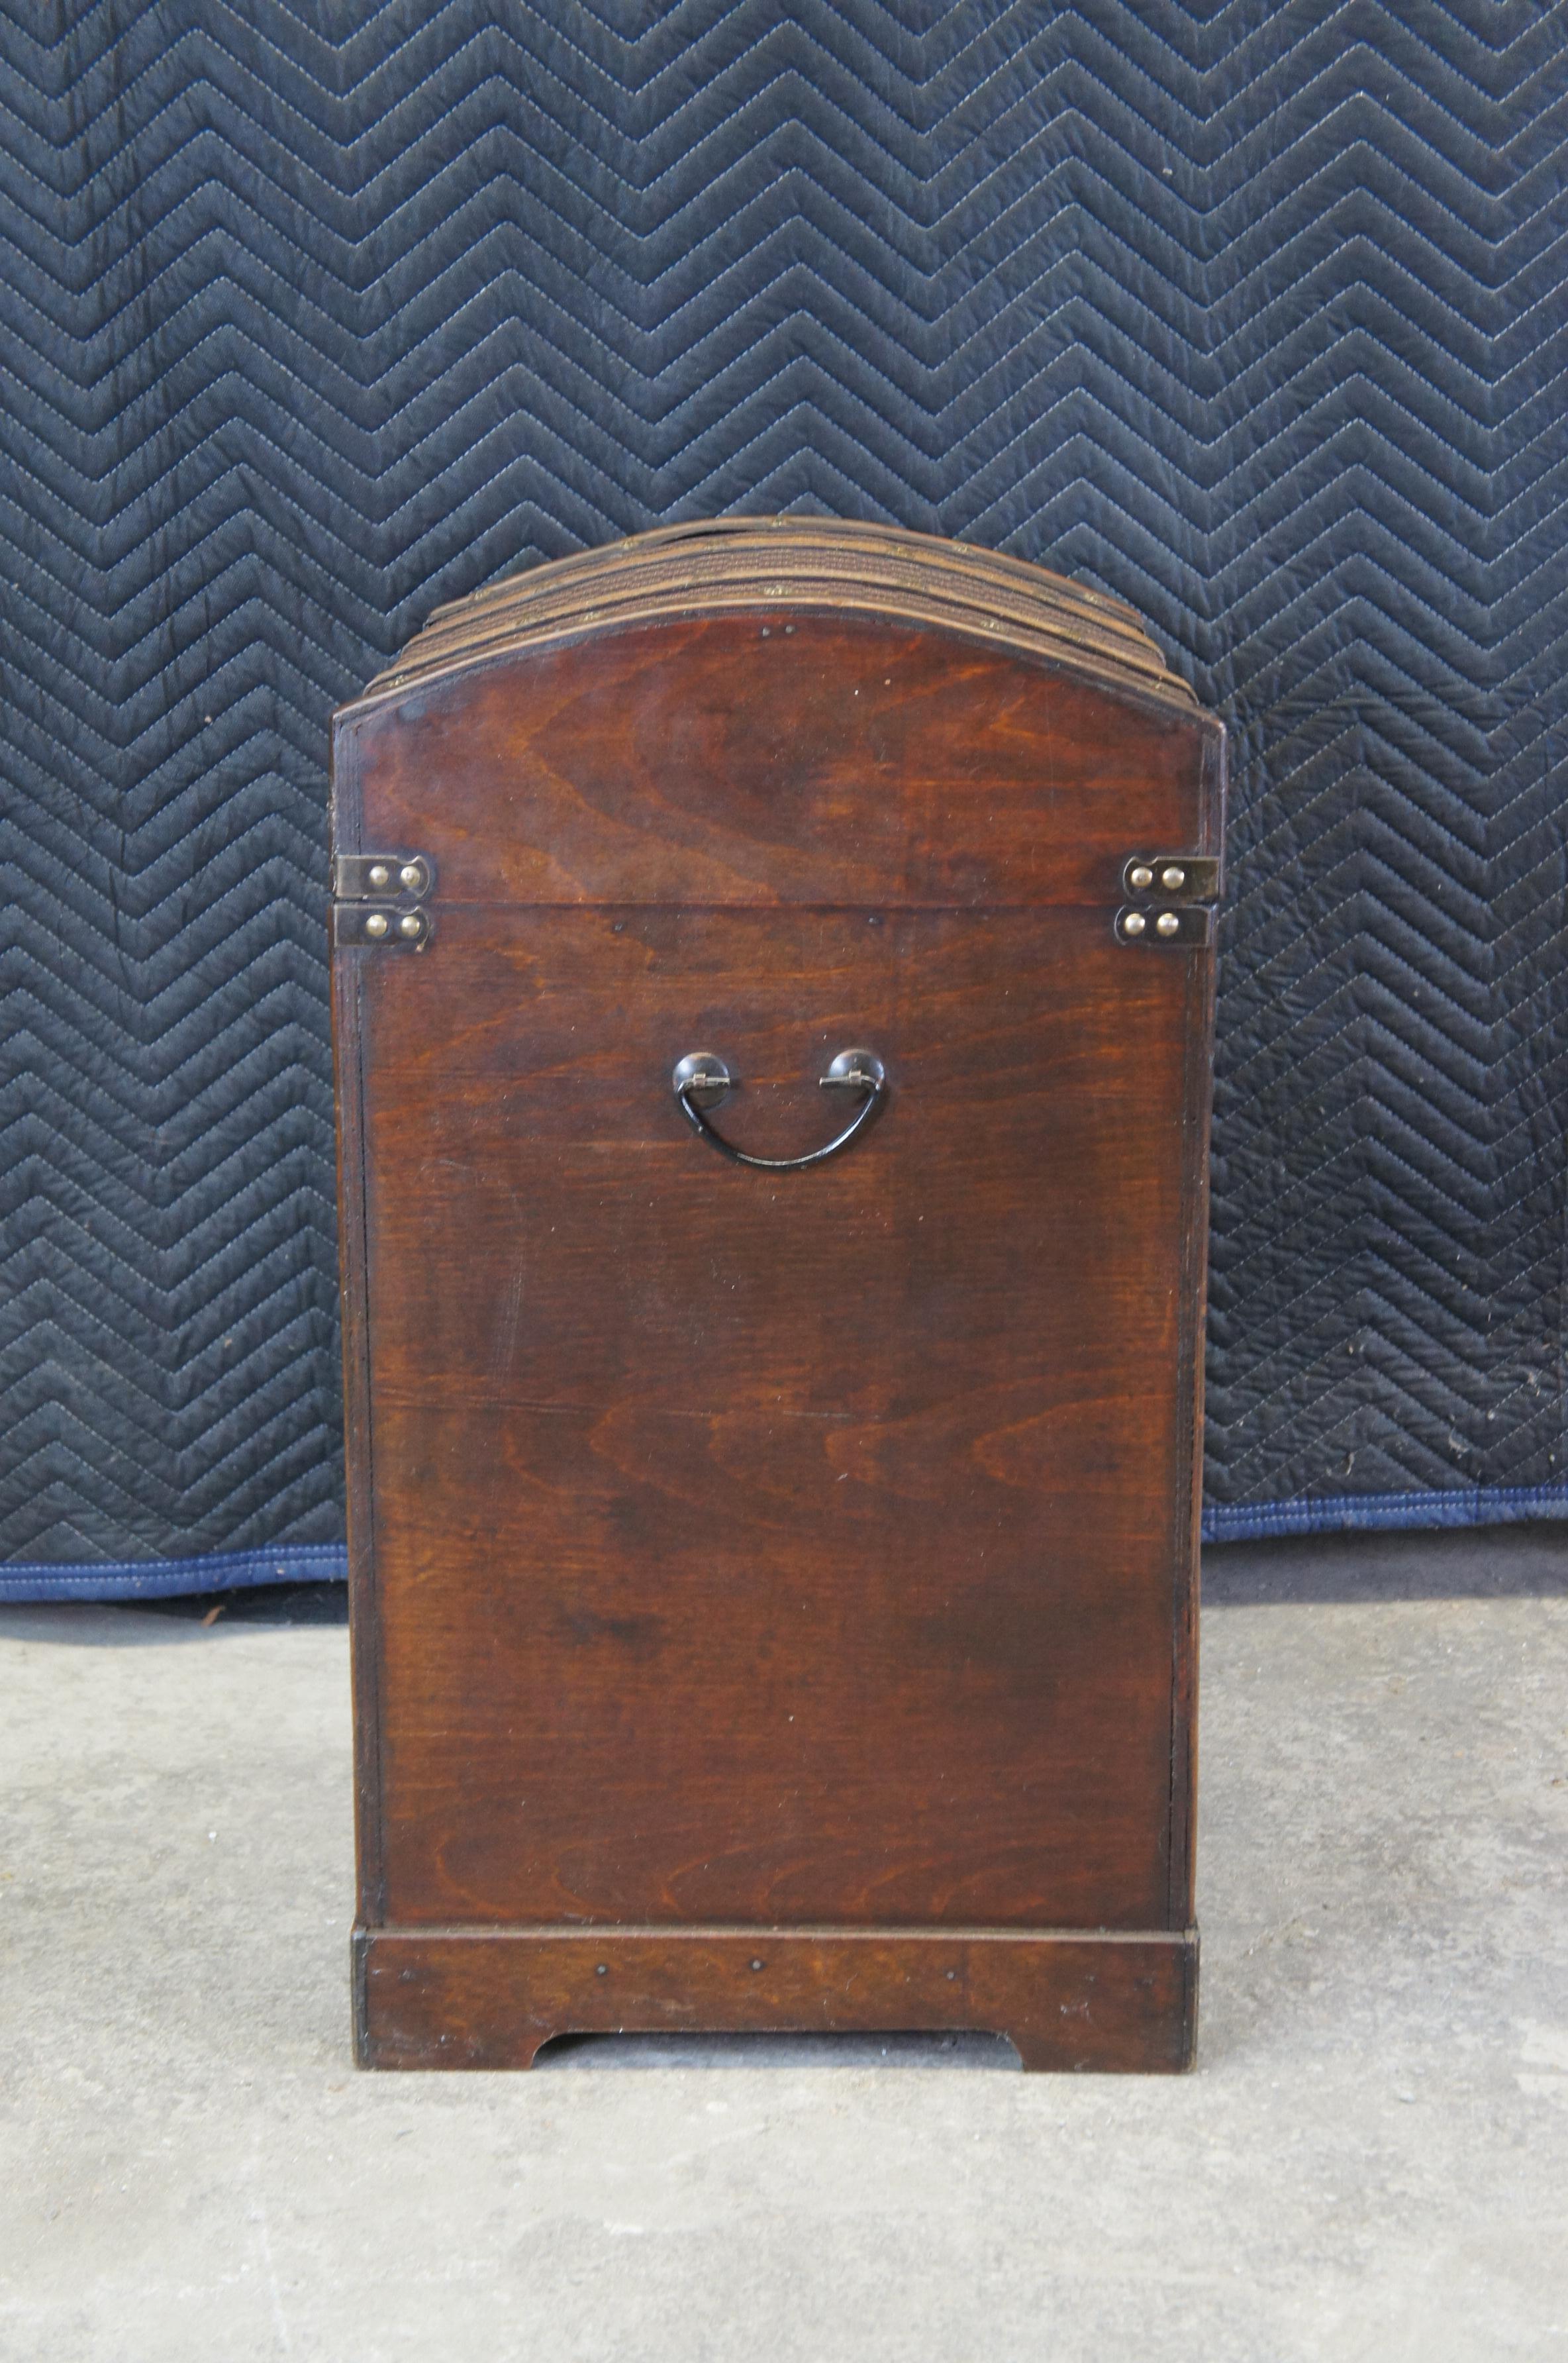 Vintage Wooden Dome Top Storage Trunk Checkered Monogrammed Canvas Chest For Sale 4